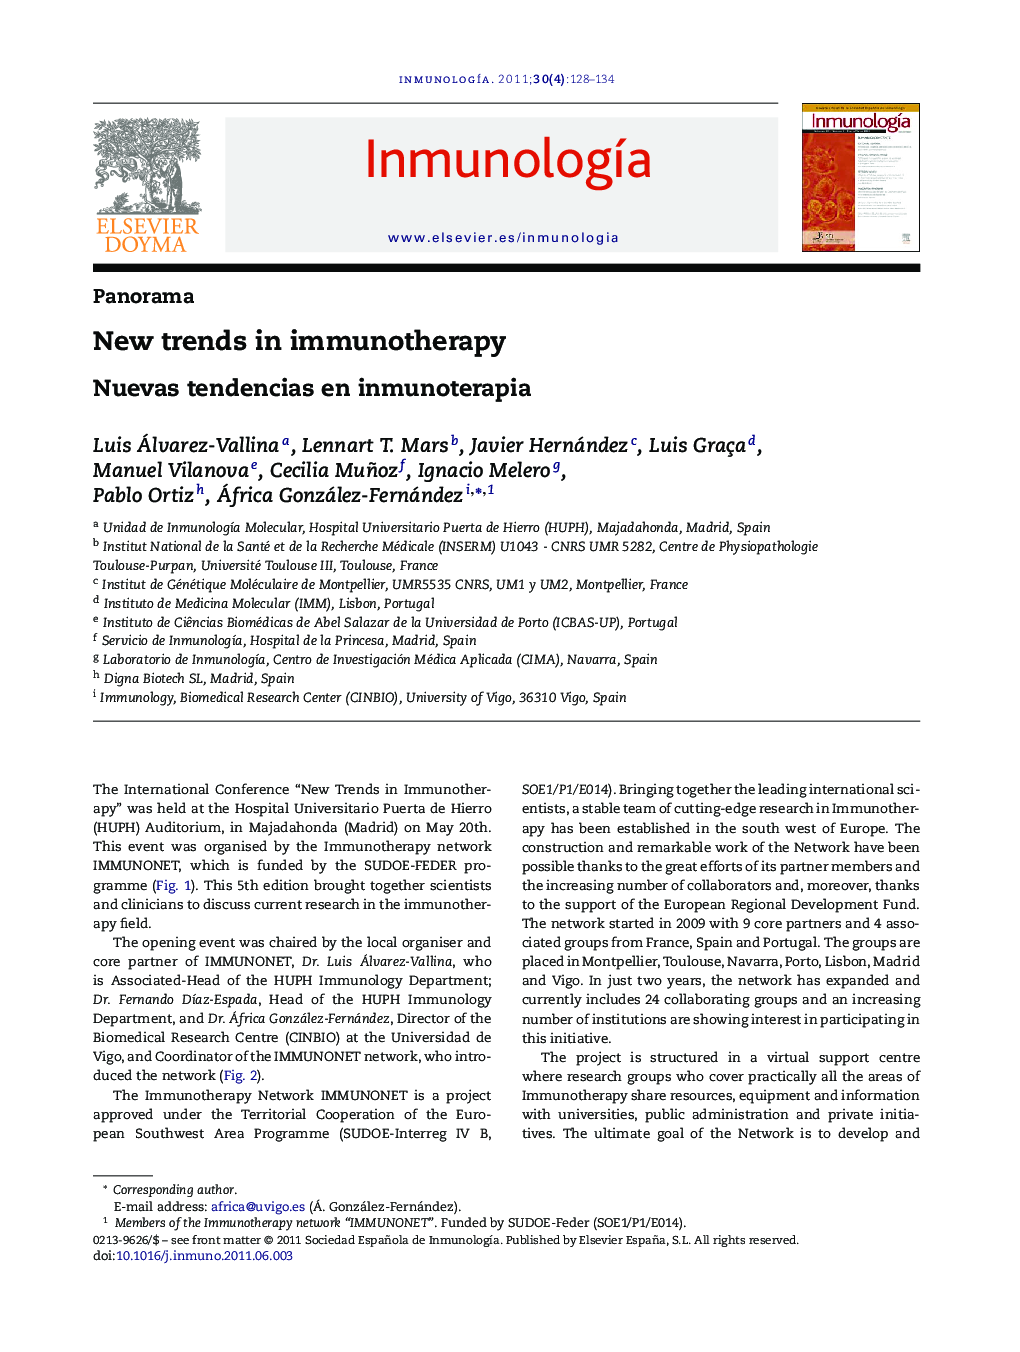 New trends in immunotherapy